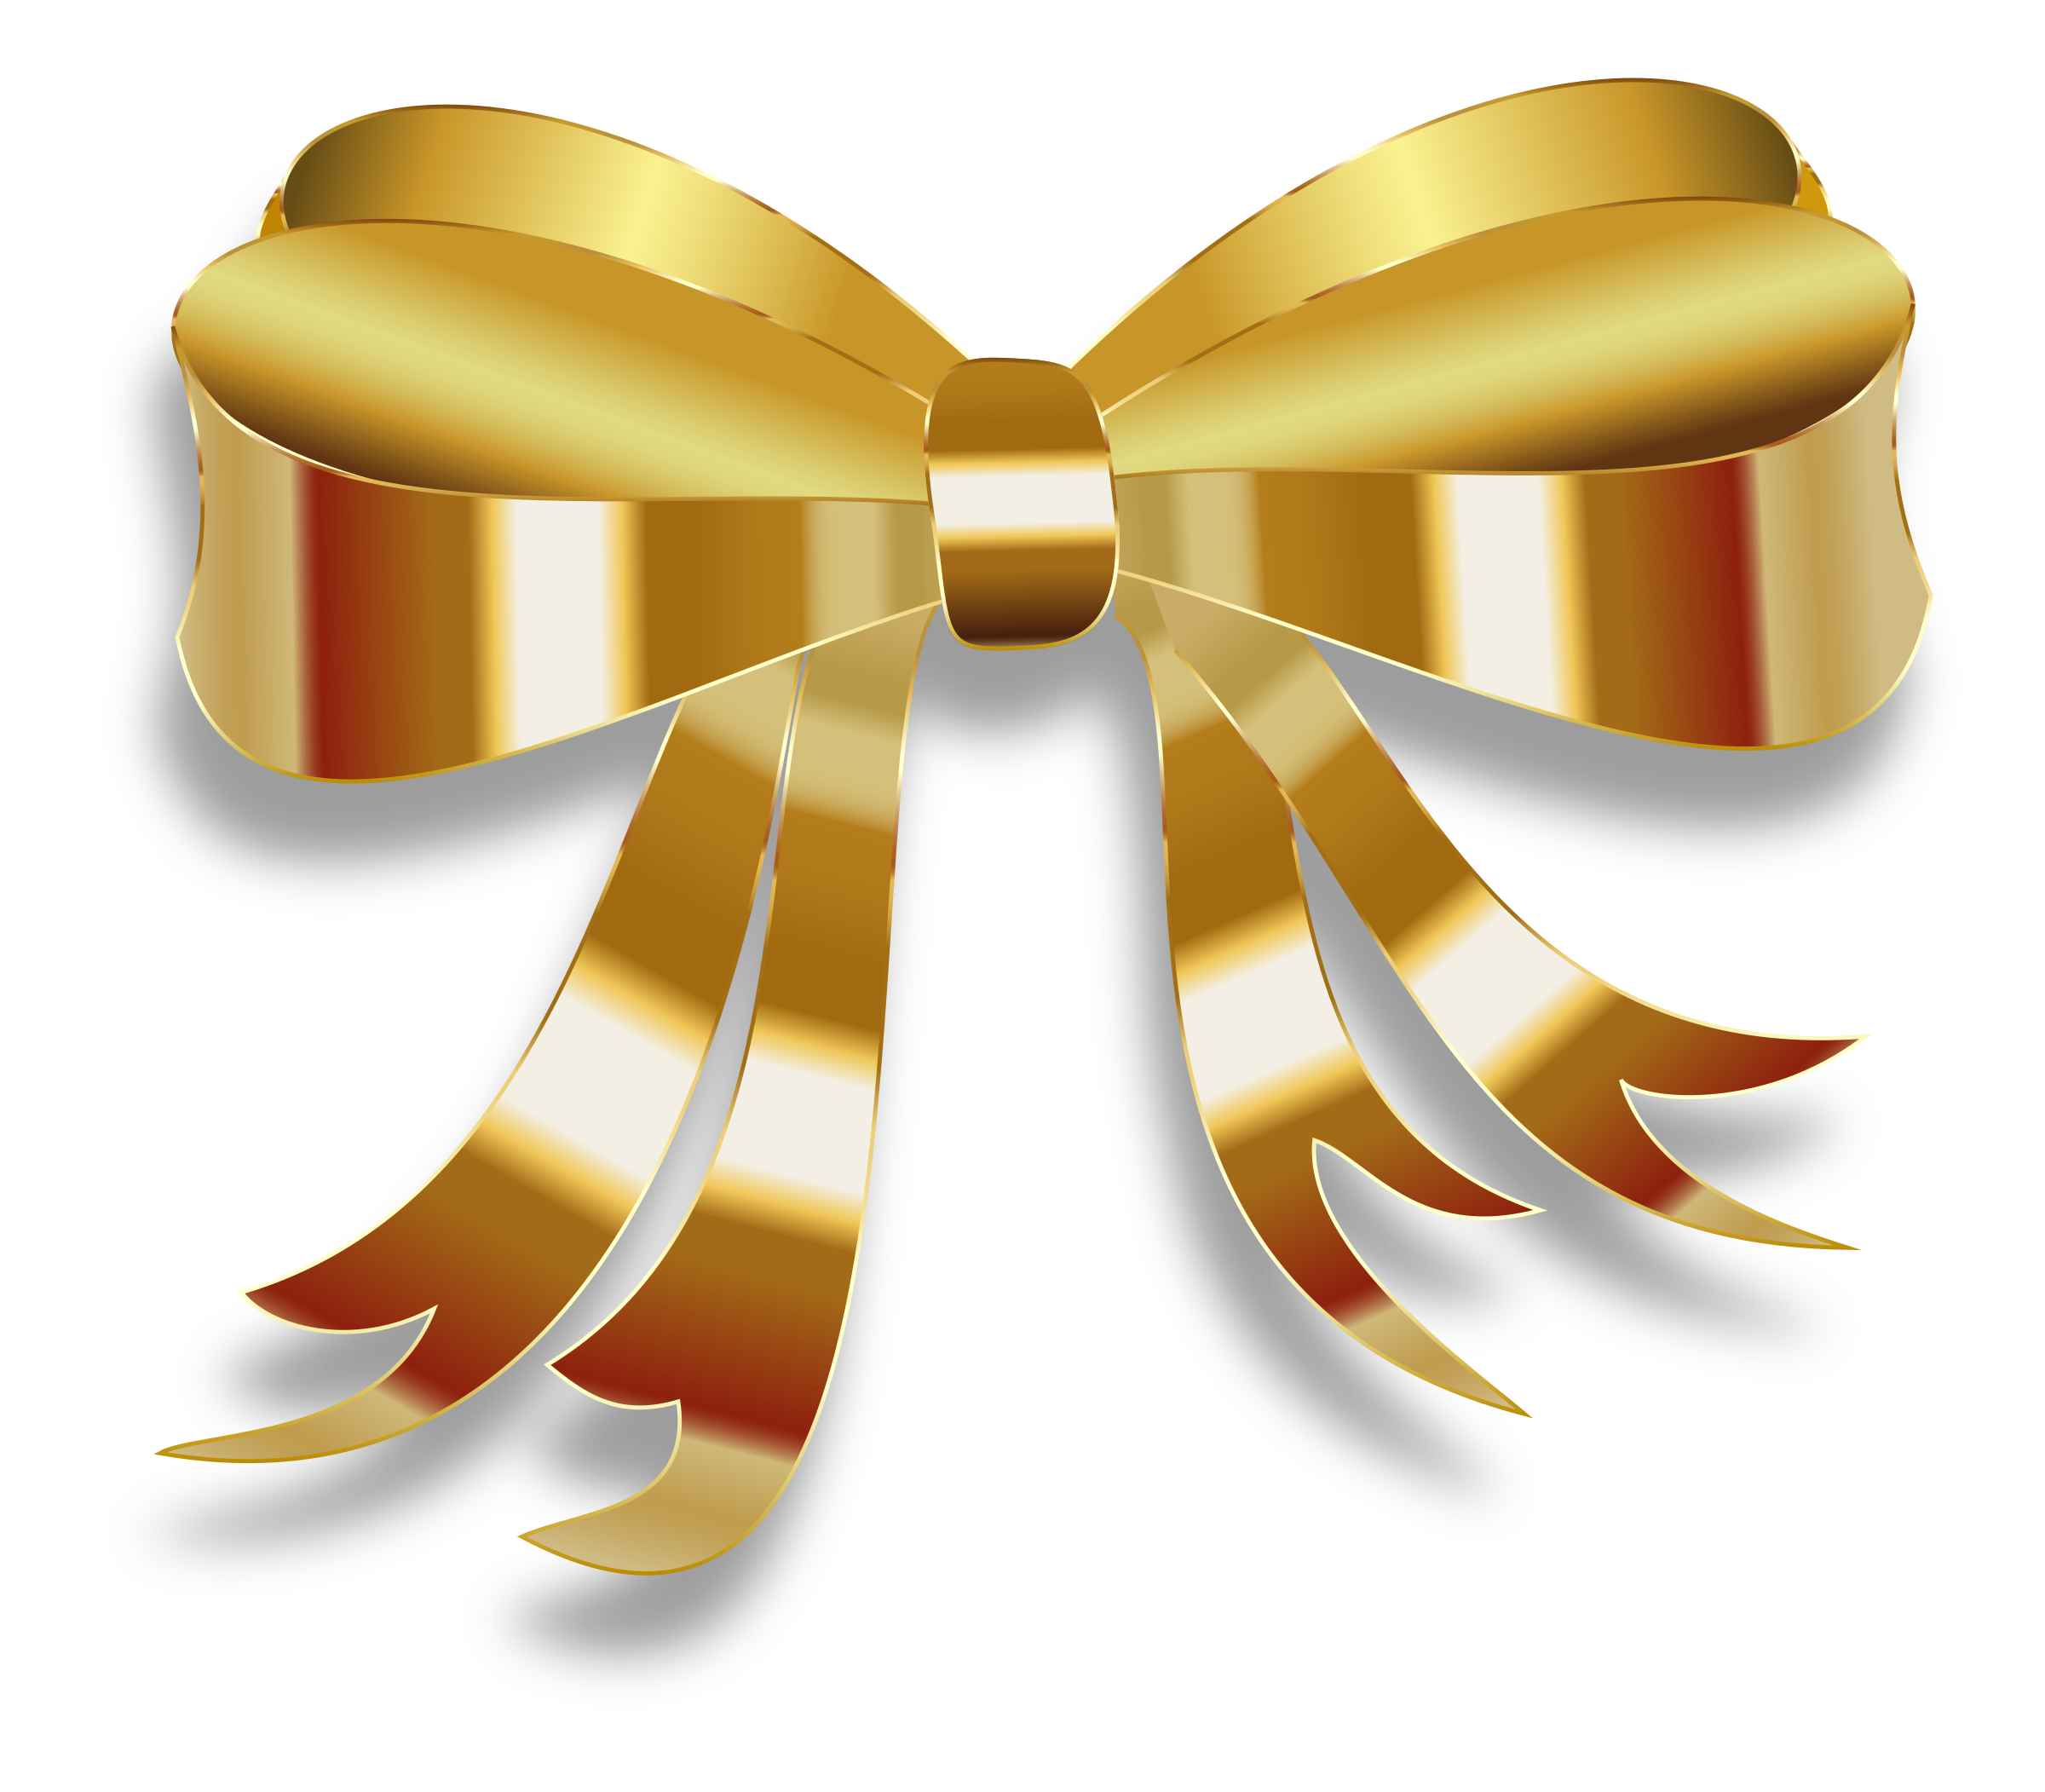 Gold Satin Ribbon Bow Isolated Over Stock Photo 2331826215 | Shutterstock